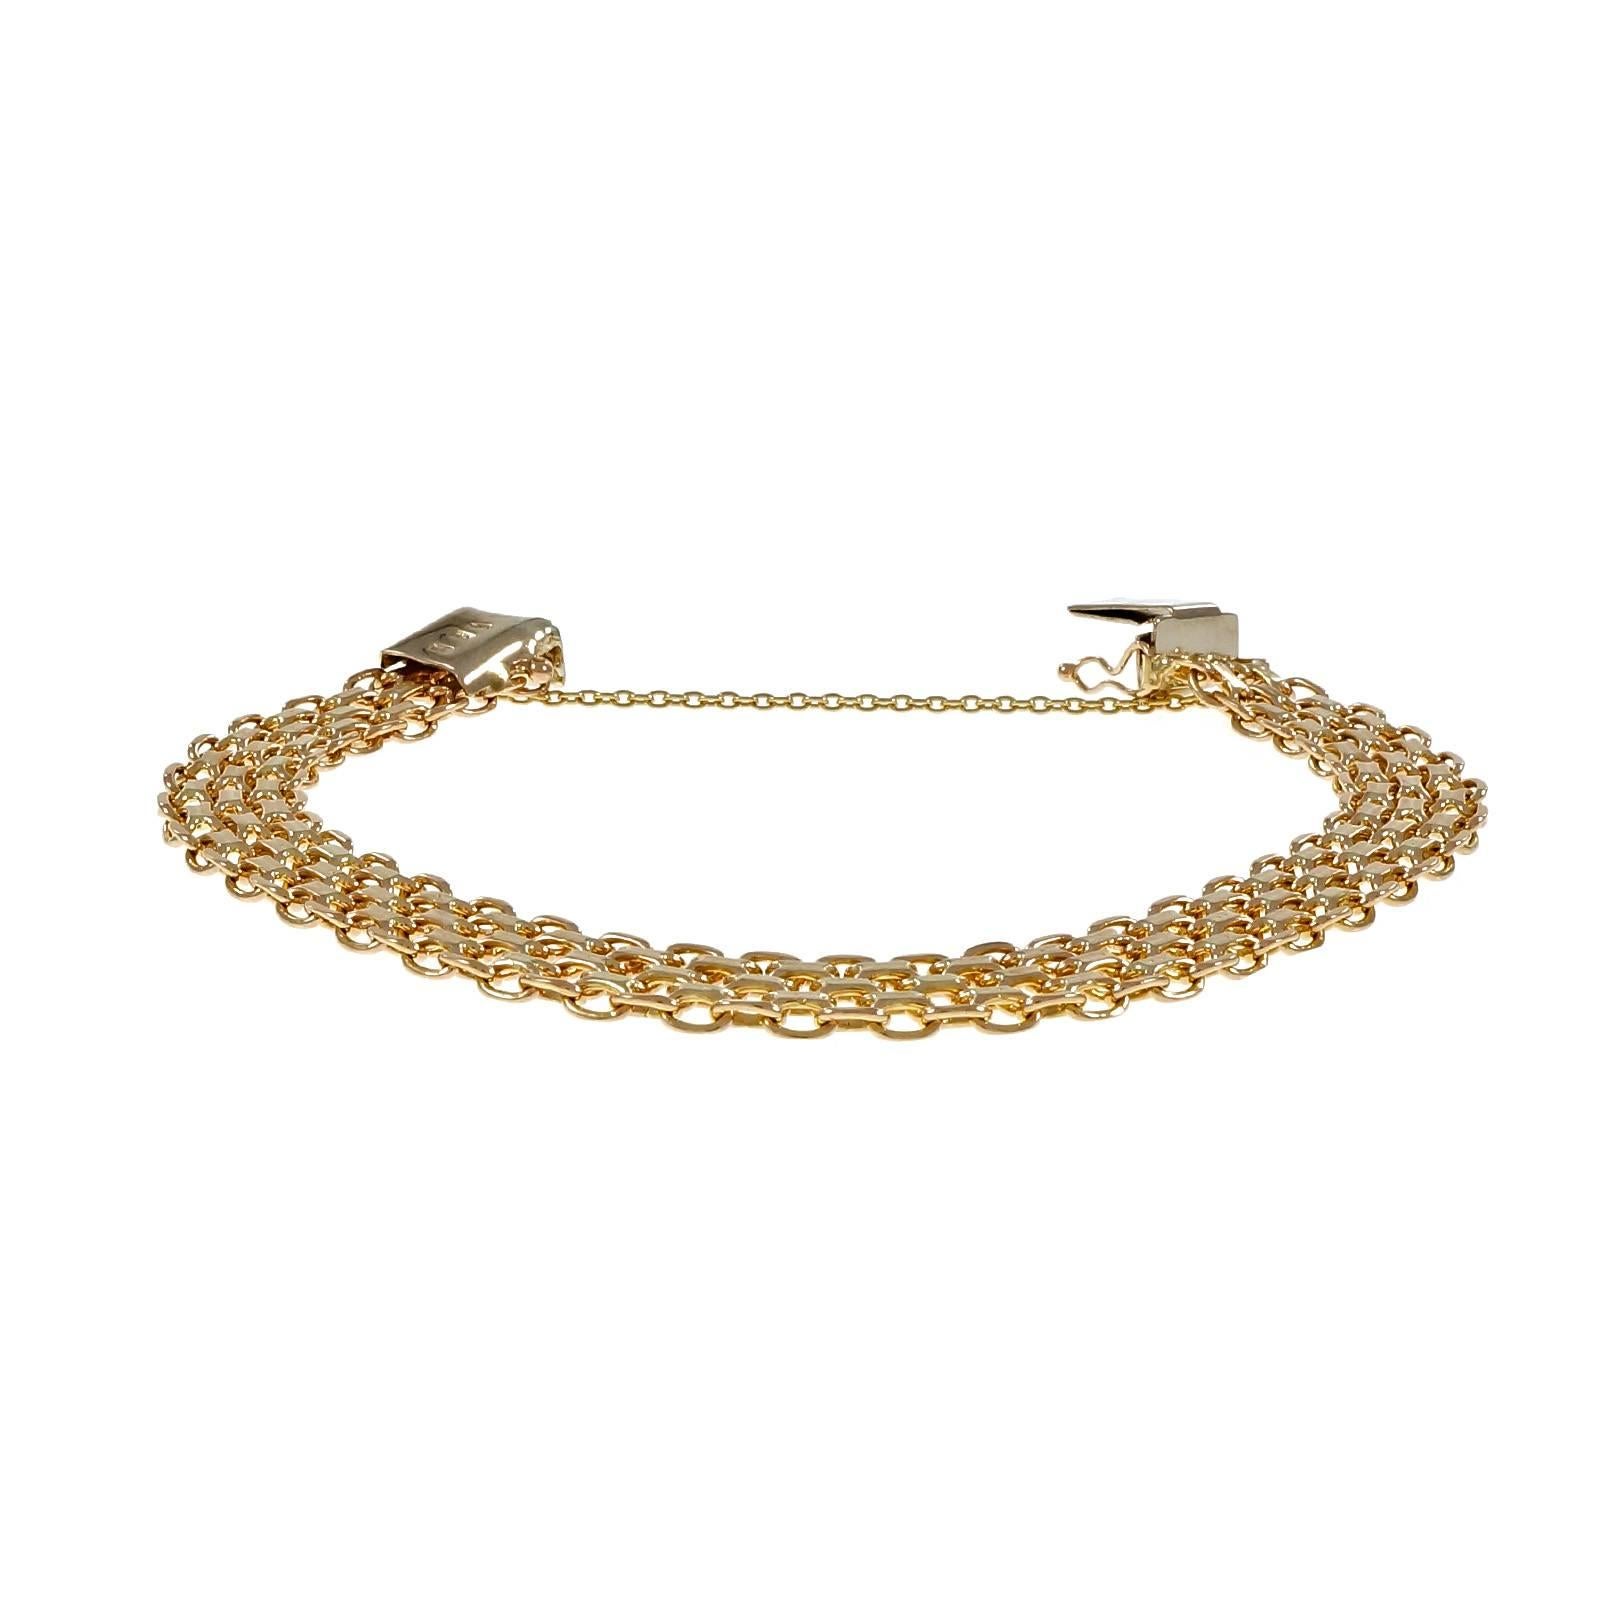 1960’s Italian Bismark link 14k yellow gold bracelet. Hidden built in catch with added safety chain.

14k yellow gold
18.2 grams
Tested and stamped: 14k
Hallmark: Italy
Length: 8.5 inches
Width: 9.47mm – Depth: 2.0mm
